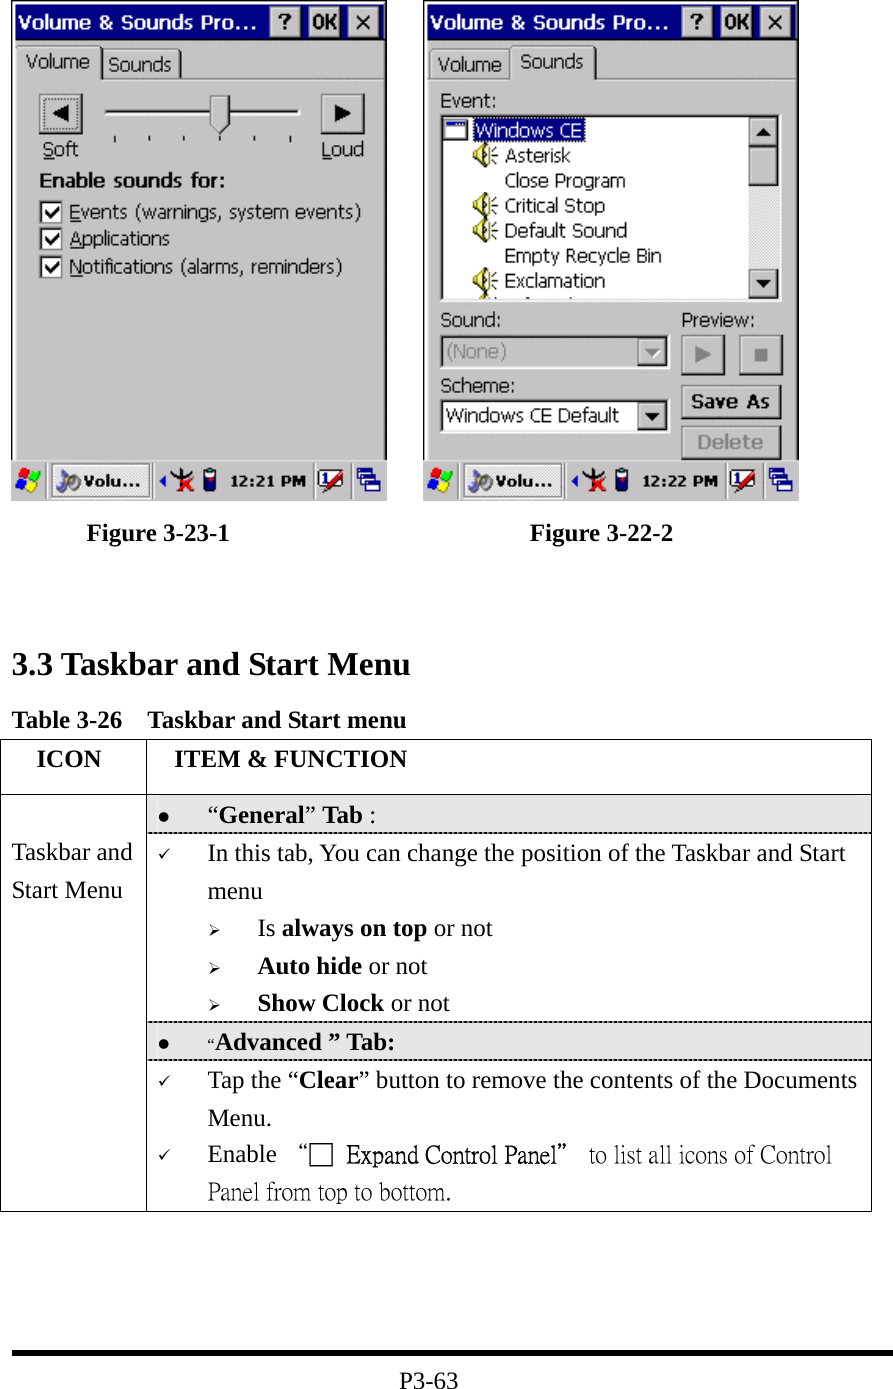             Figure 3-23-1                        Figure 3-22-2   3.3 Taskbar and Start Menu Table 3-26    Taskbar and Start menu   ICON   ITEM &amp; FUNCTION   “General” Tab :     In this tab, You can change the position of the Taskbar and Start menu     Is always on top or not   Auto hide or not   Show Clock or not   “Advanced ” Tab:    Taskbar and Start Menu   Tap the “Clear” button to remove the contents of the Documents Menu.   Enable “□  Expand Control Panel＂ to list all icons of Control Panel from top to bottom.     P3-63 